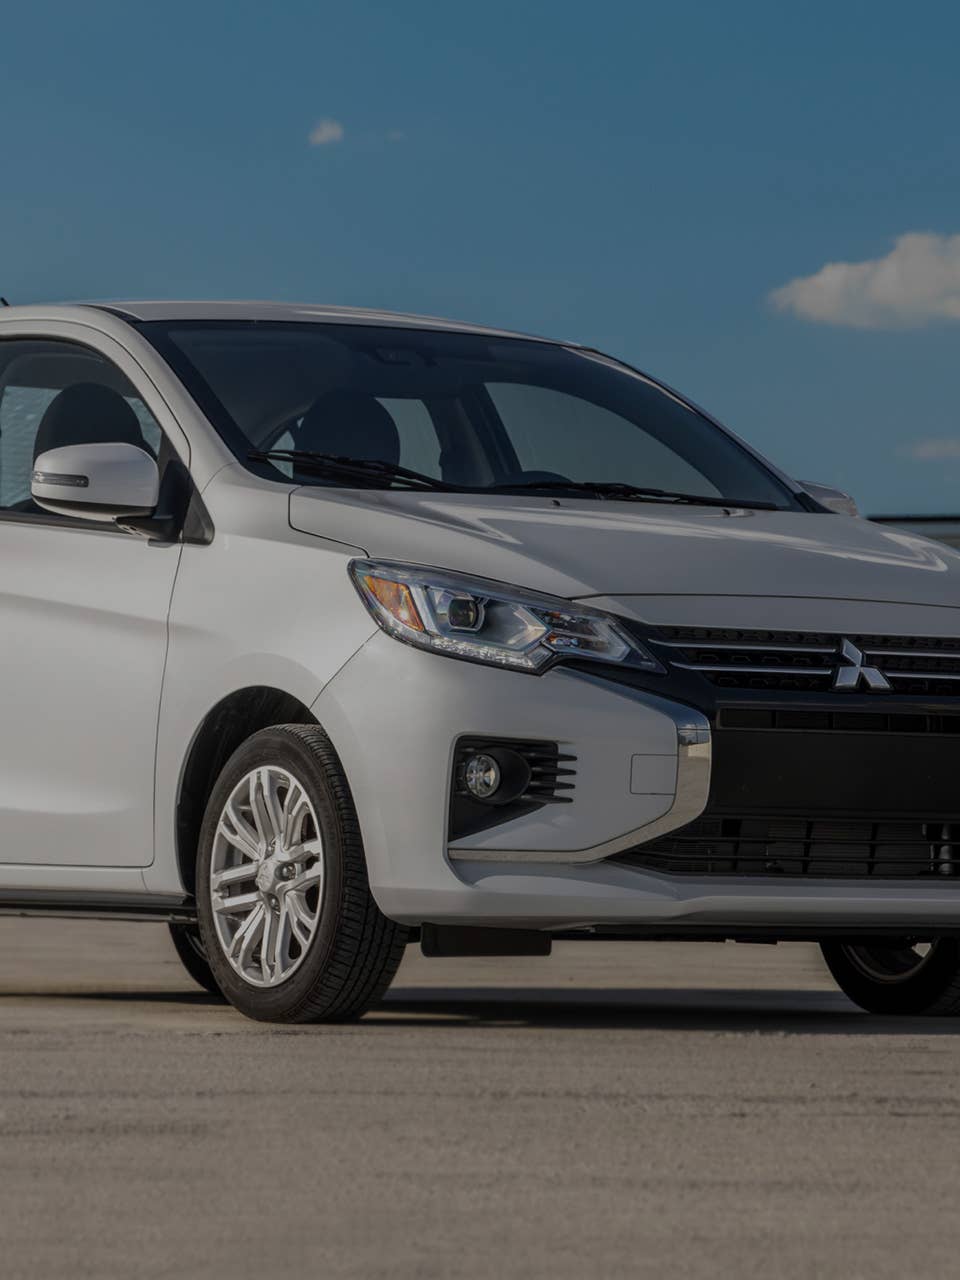 https://www.mitsubishicars.com/content/dam/mitsubishi-motors-us/images/siteimages/cars/mirage-g4/my23/overview/2023-mitsubishi-sedan-white-parked-front-side-view-m.jpg?width=960&auto=webp&quality=70